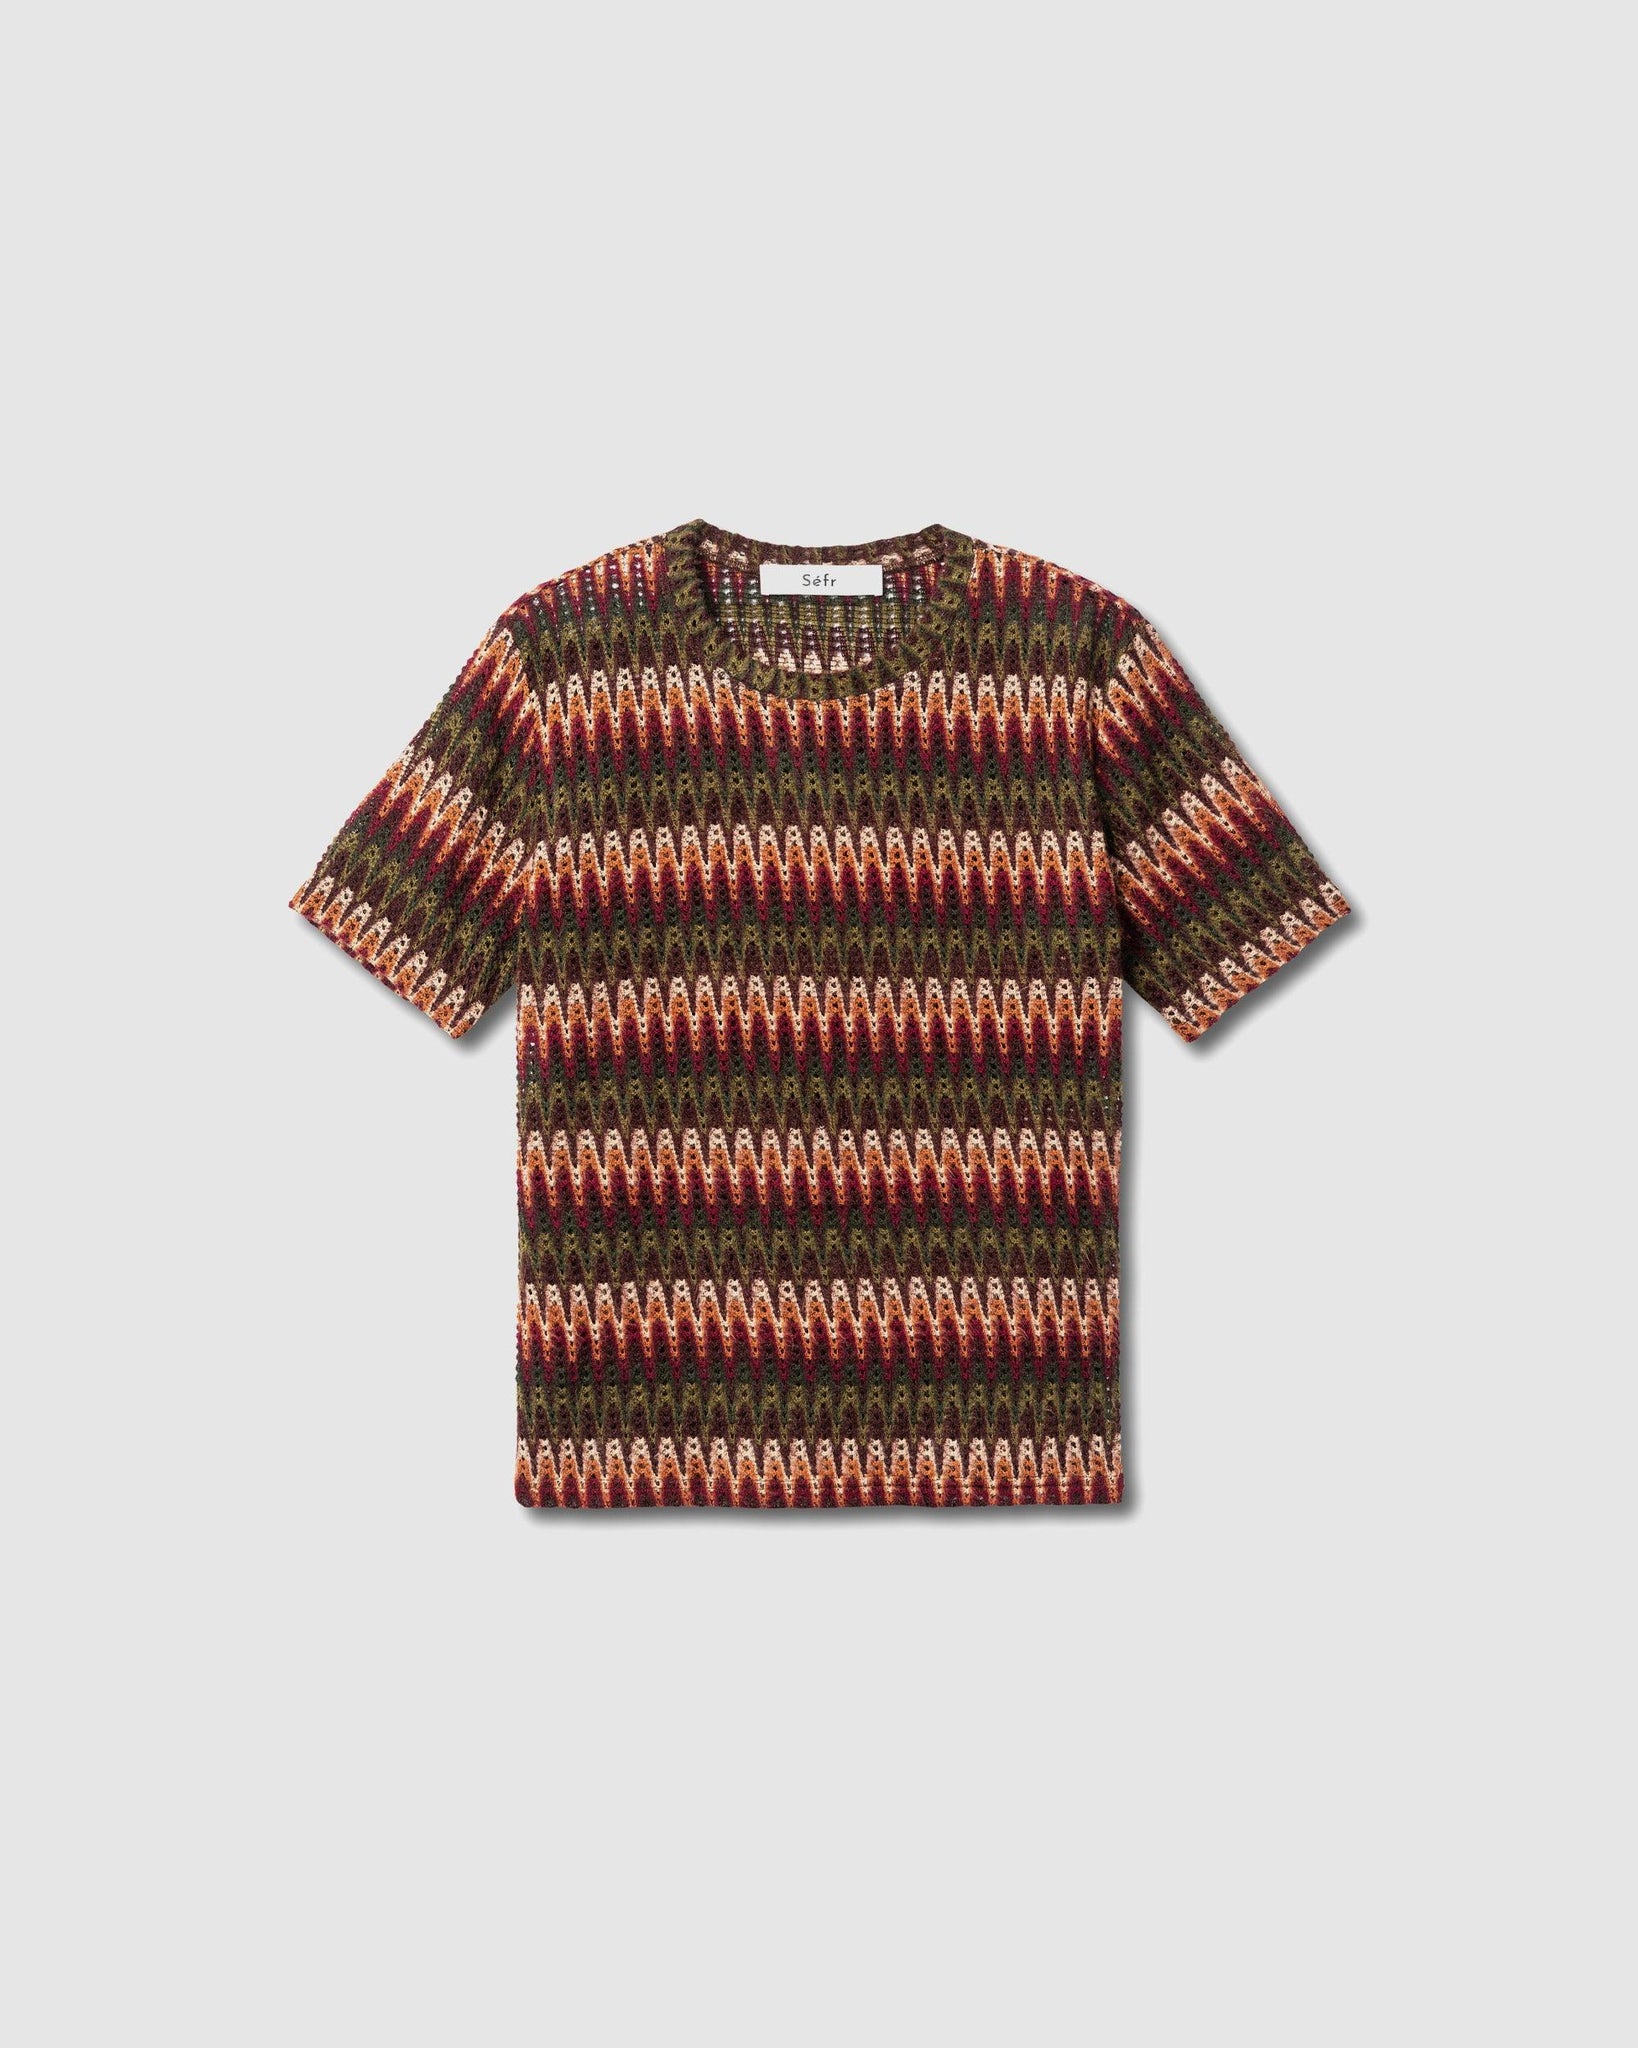 Subzi Tee Peafowl - {{ collection.title }} - Chinatown Country Club 